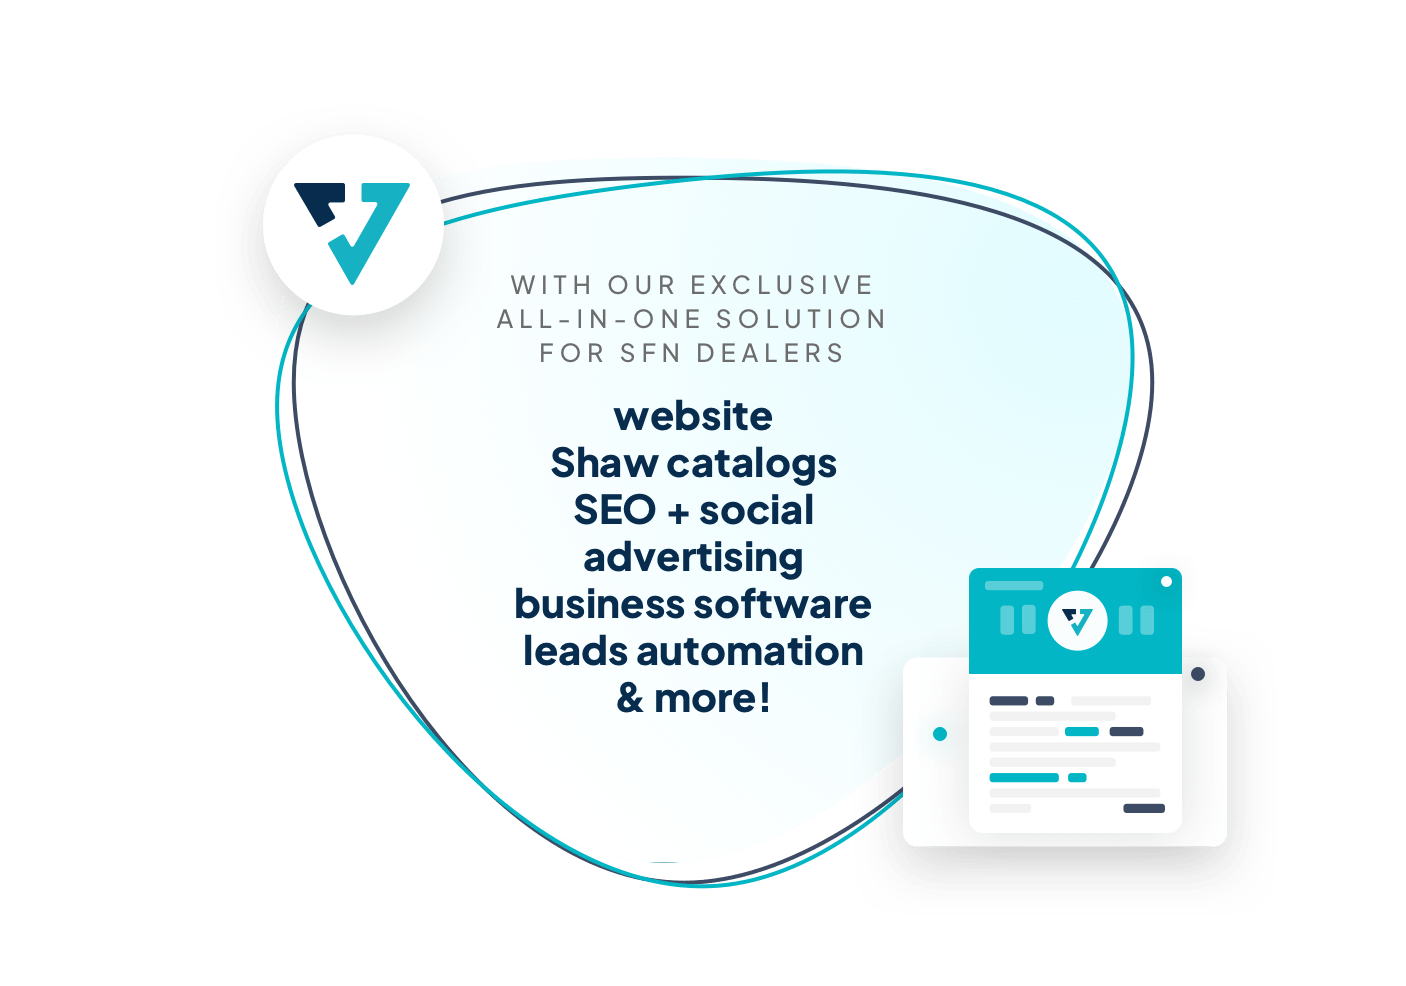 our-exclusive-all-in-one-solution-for-sfn dealers | SFN Velocity